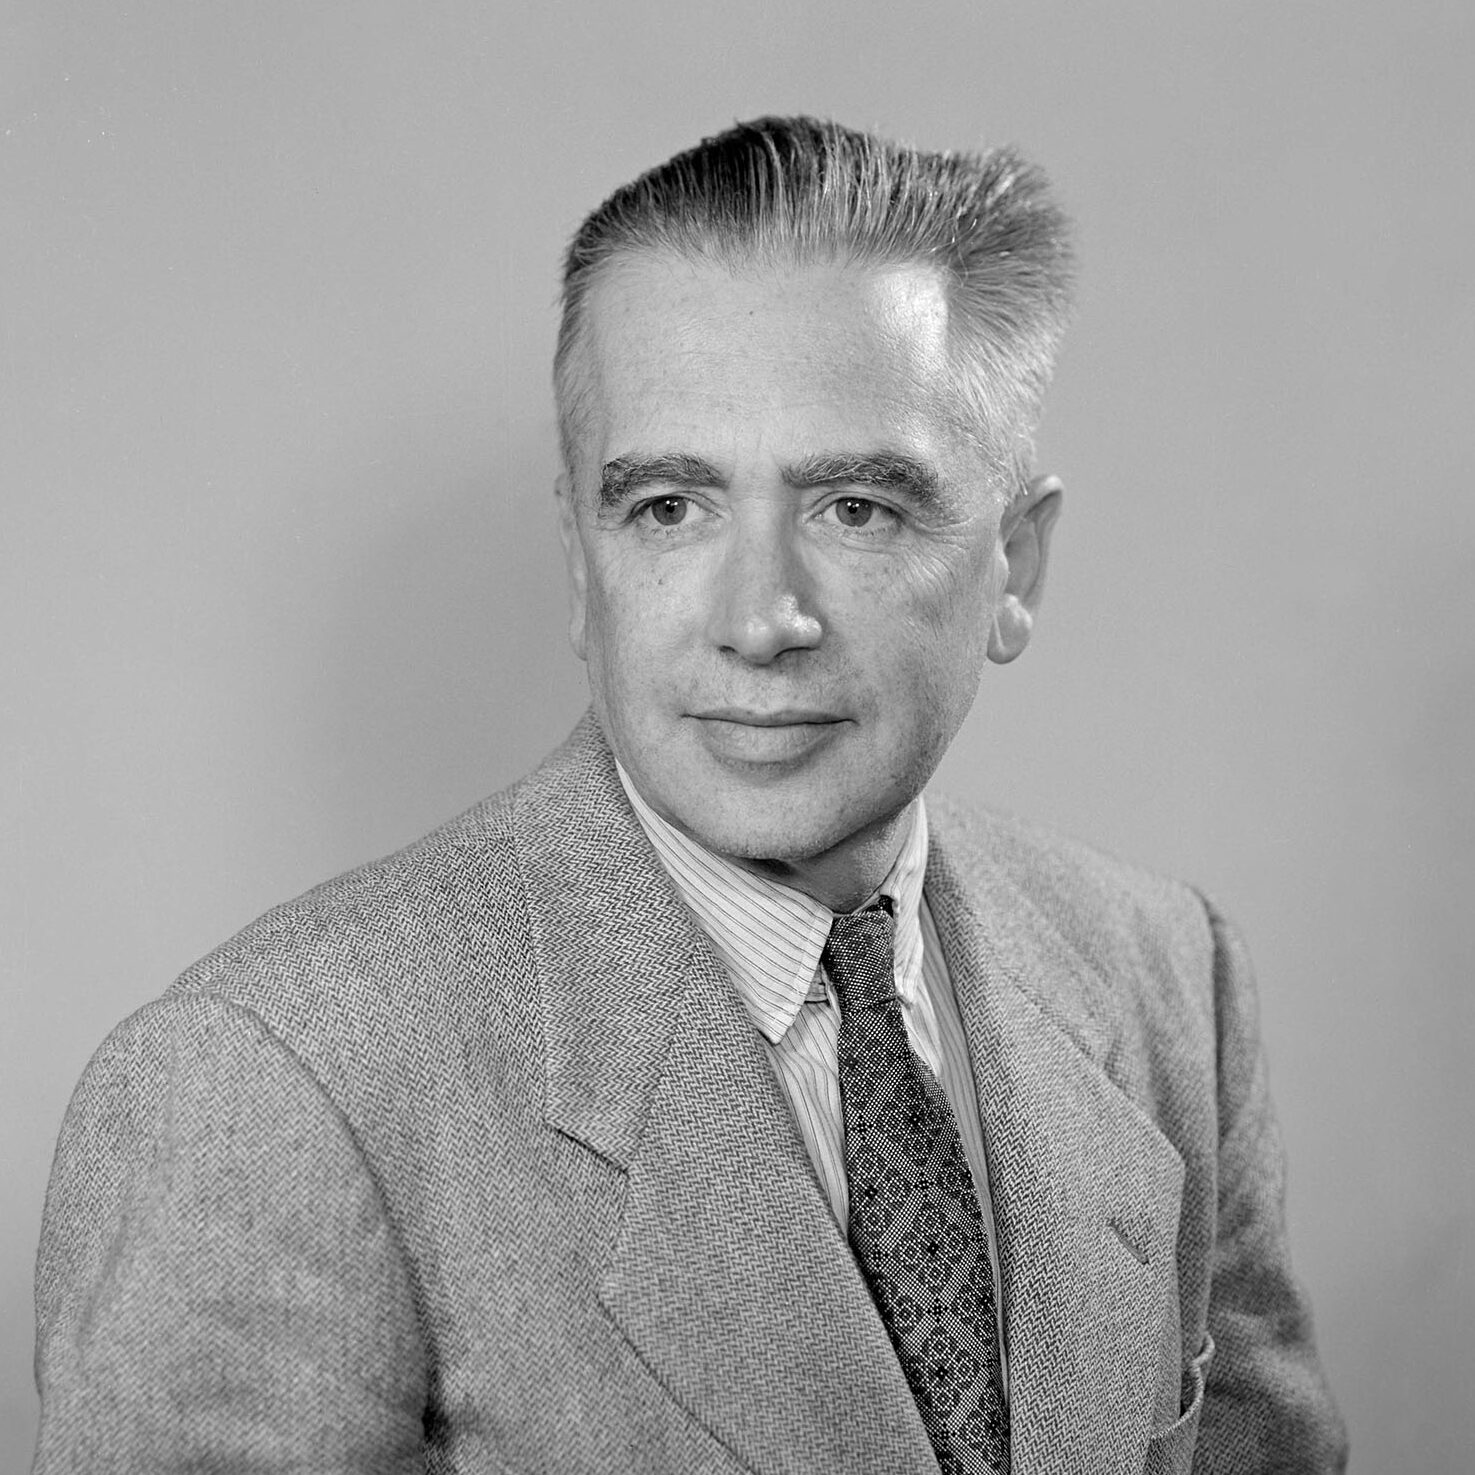 Person with short hair in a suit and tie.